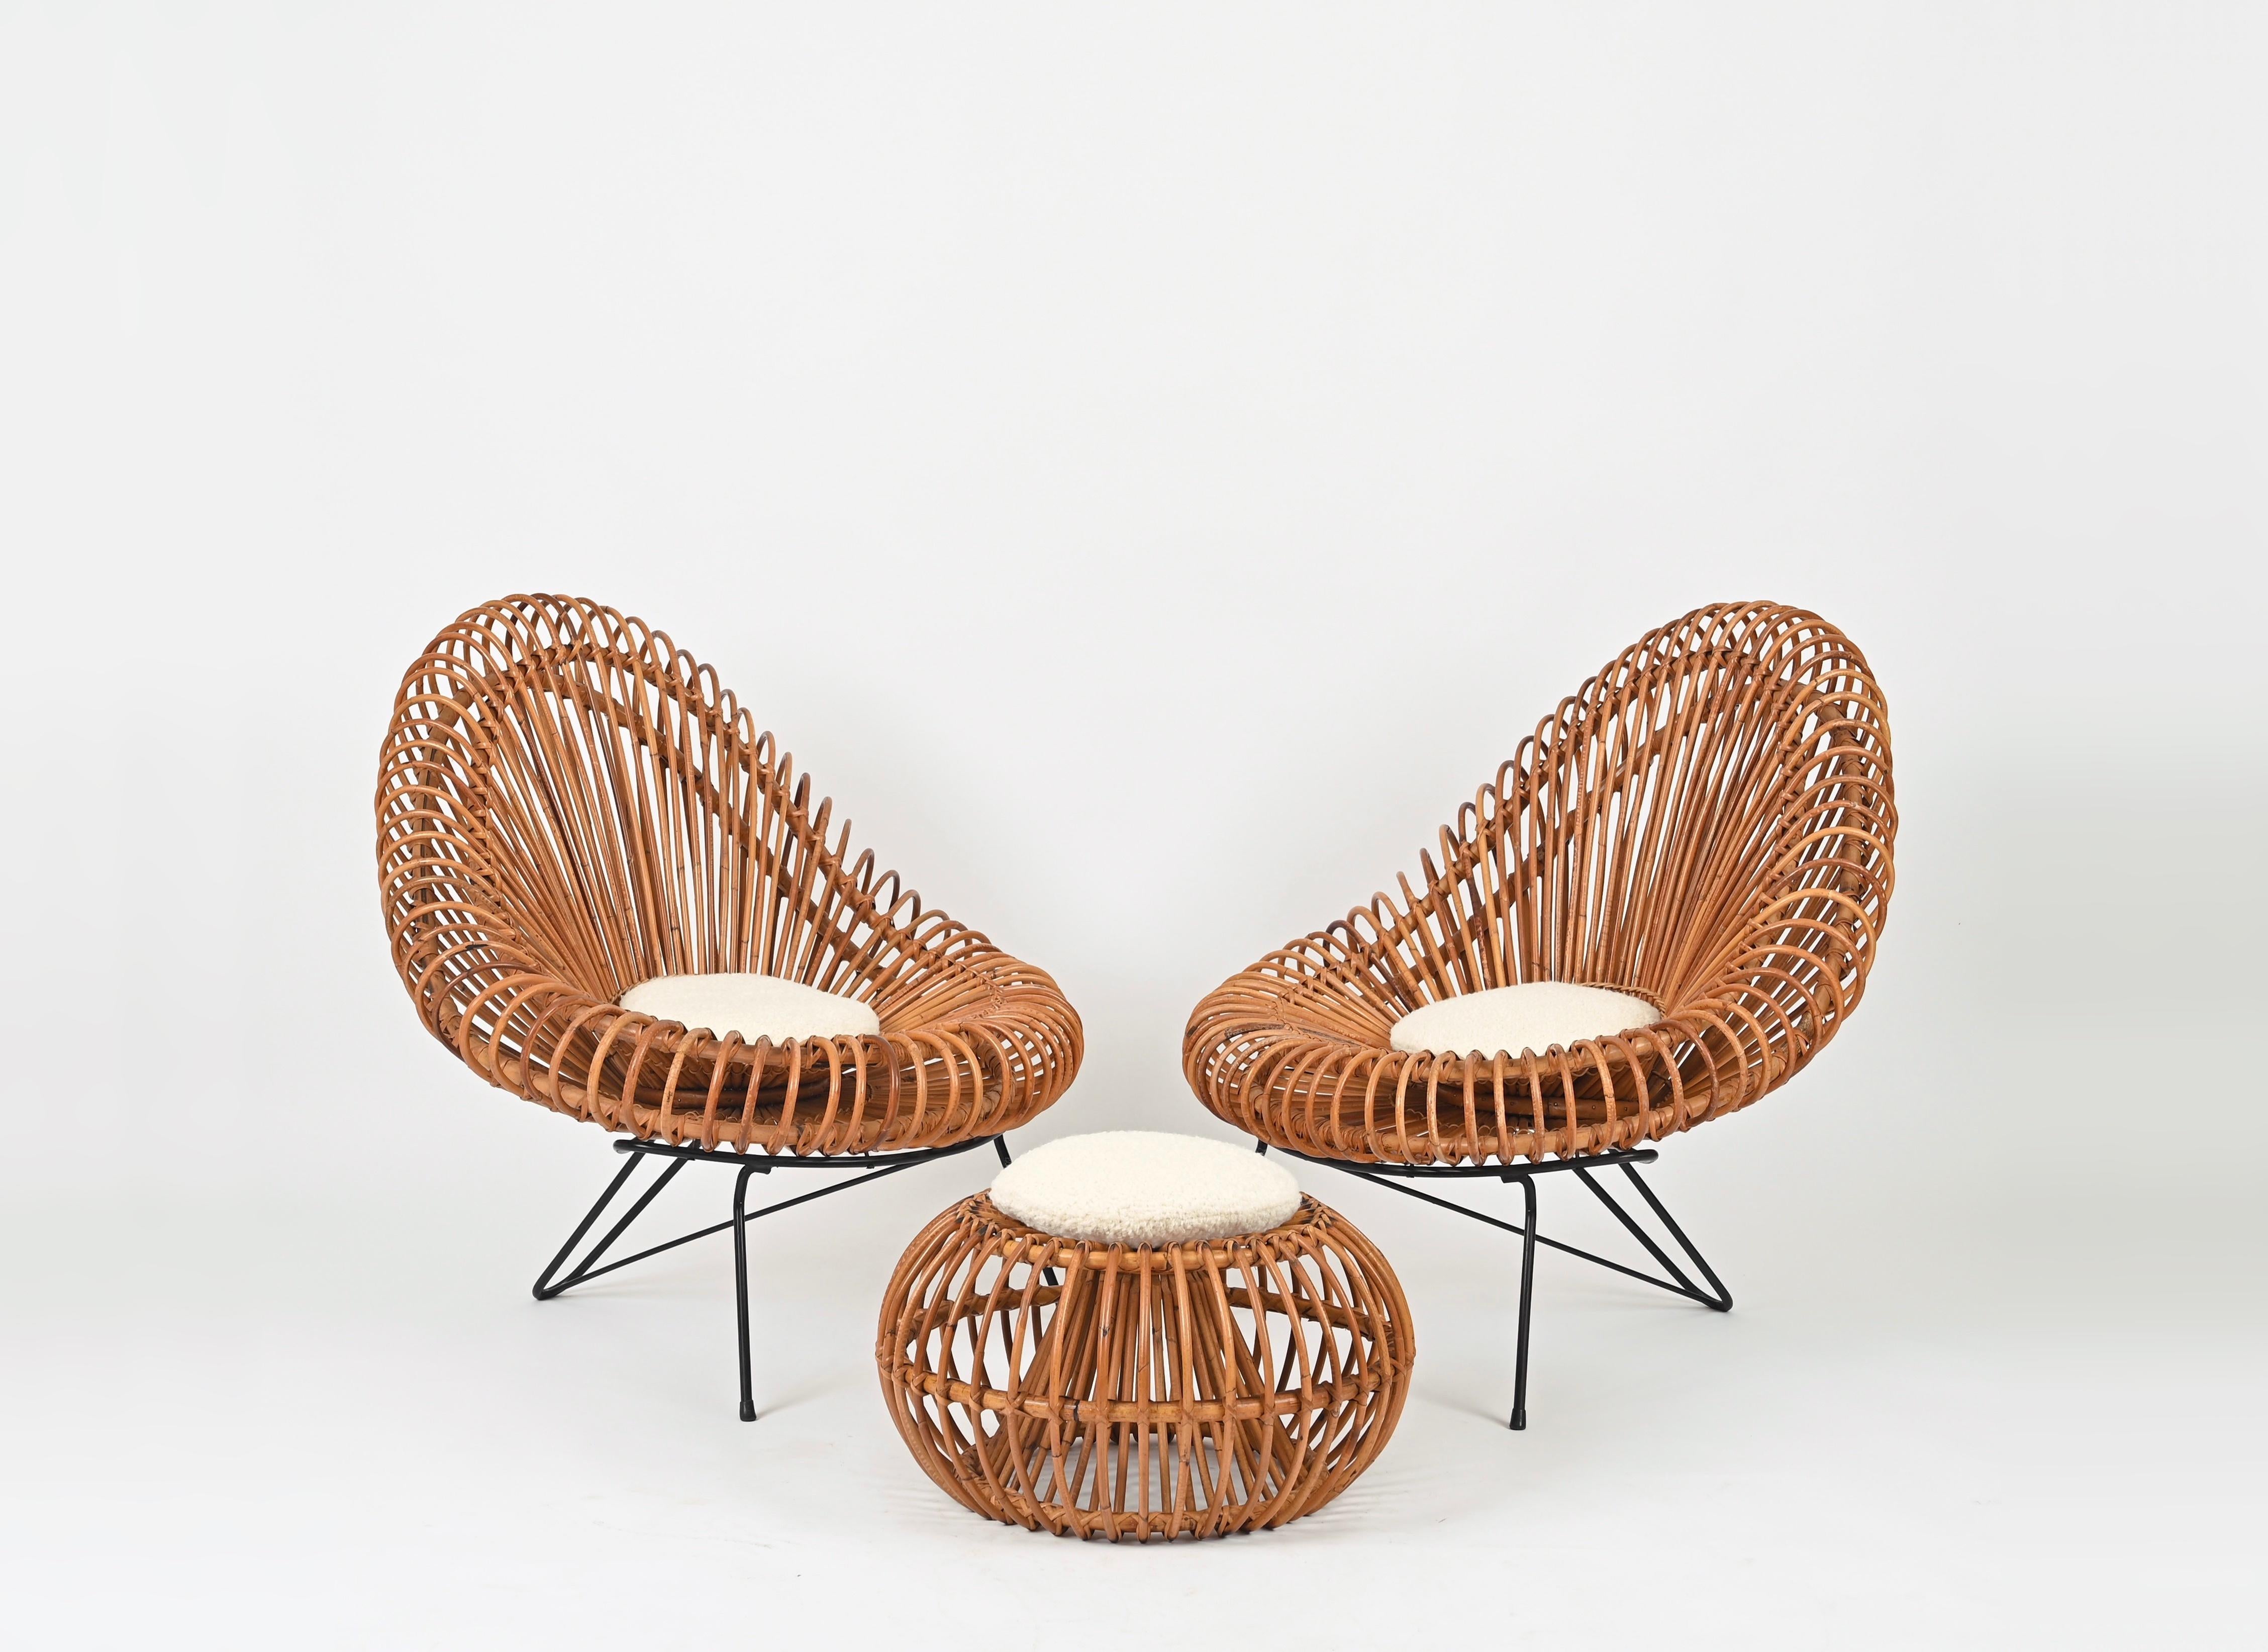 Living Room Rattan Set by Janine Abraham & Dirk Jan Rol - Chairs, Pouf, Mirror  For Sale 5